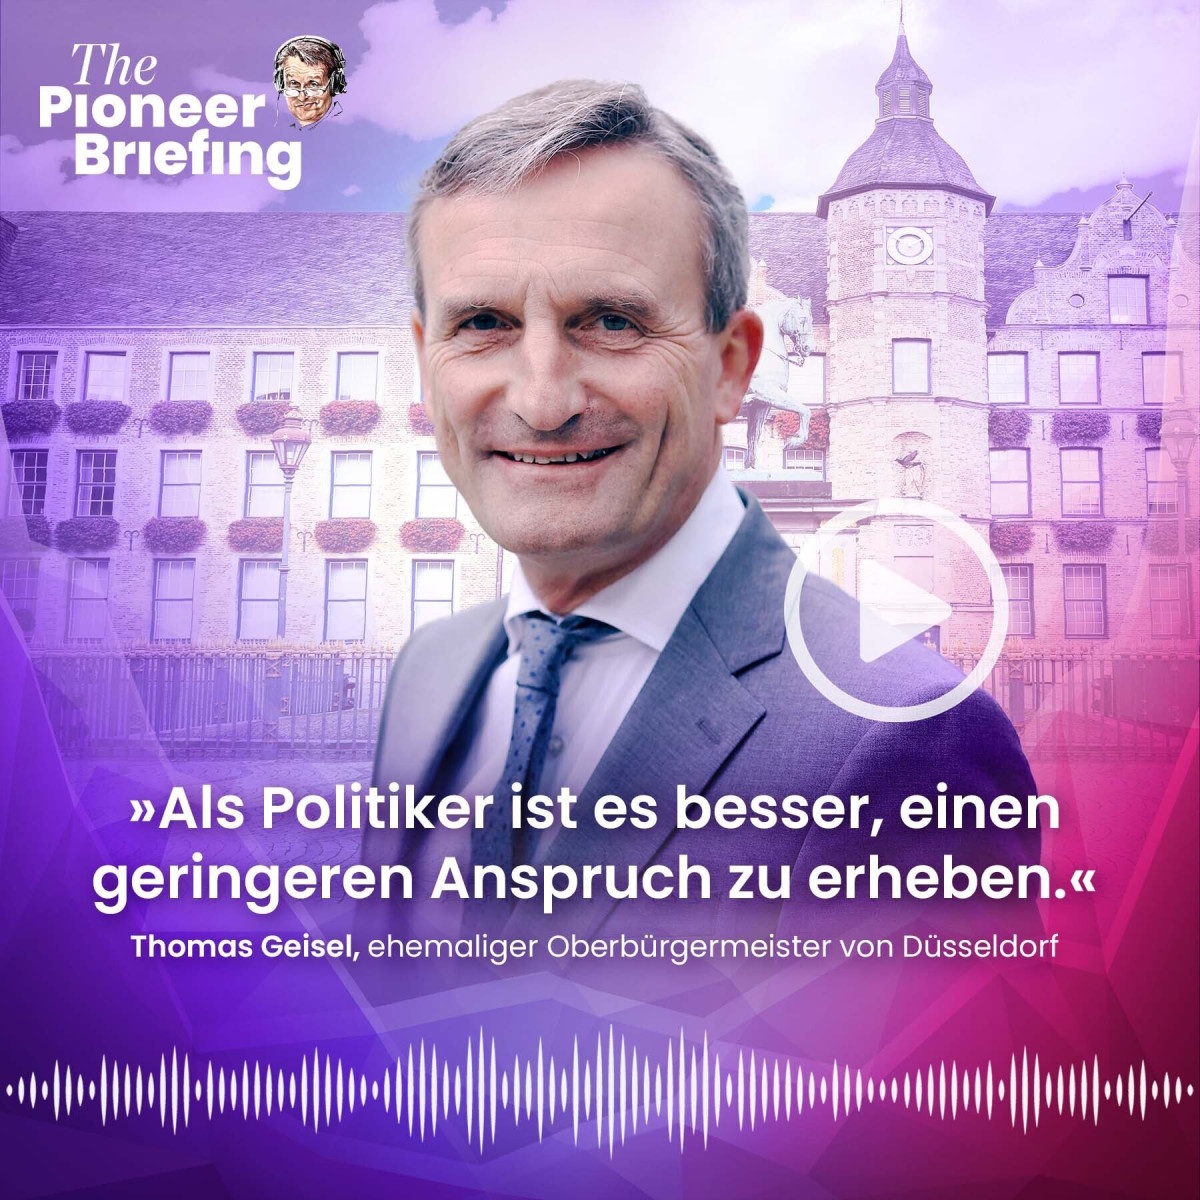 20220406-podcast-pioneer-briefing-mp-geisel (1)